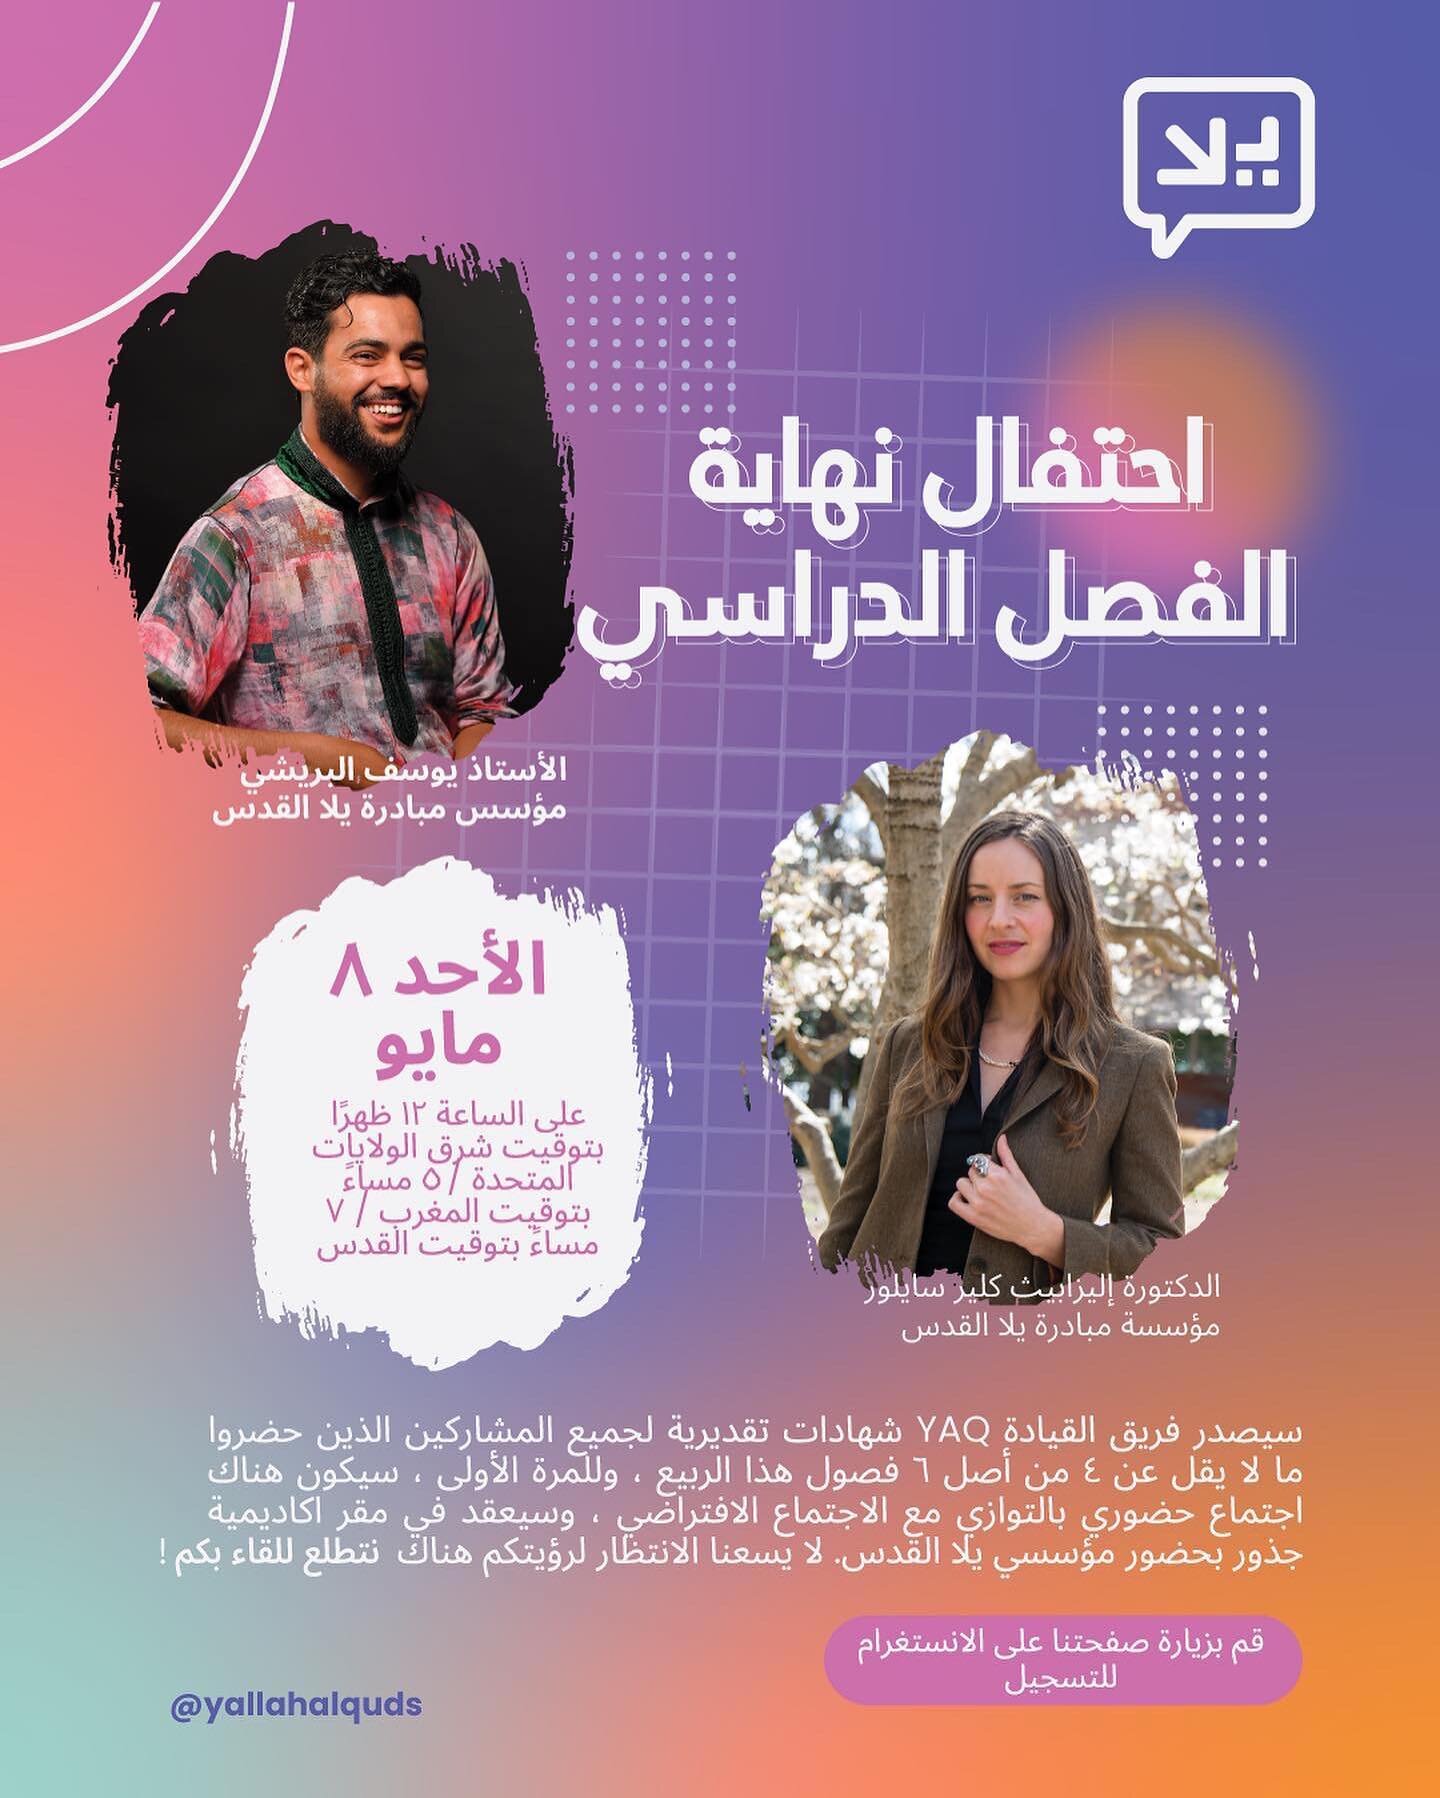 Yallah, let&rsquo;s celebrate!!!! Link in bio to register for our first ever HYBRID end-of-program ceremony! Sunday, May 8, 12 PM EST / 5 PM Morocco / 7 PM Jerusalem. We can&rsquo;t wait to see you there! 
يلا نحتفل! تجدون رابط التسجيل للمشاركة باول 